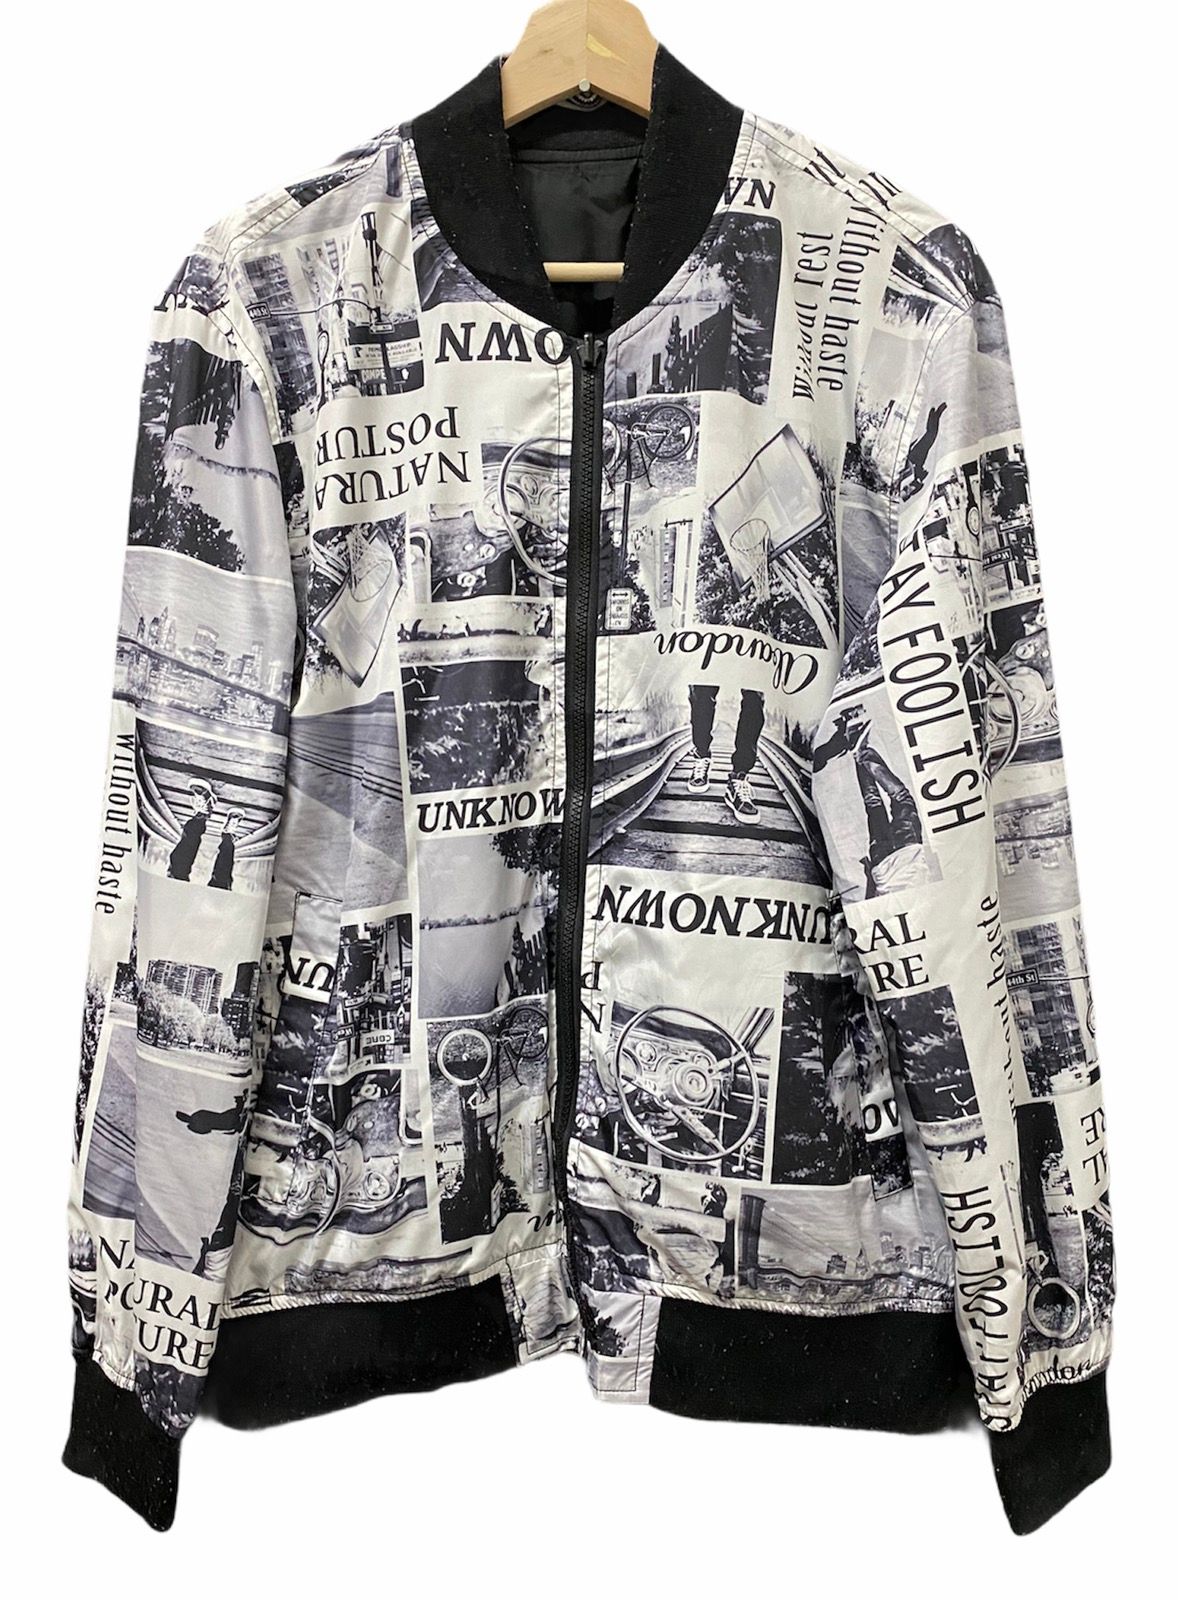 Archival Clothing - SUGGESTION🇯🇵NEWSPAPER GRAPHICS BOMBER JACKET LIKE SUPREME - 4